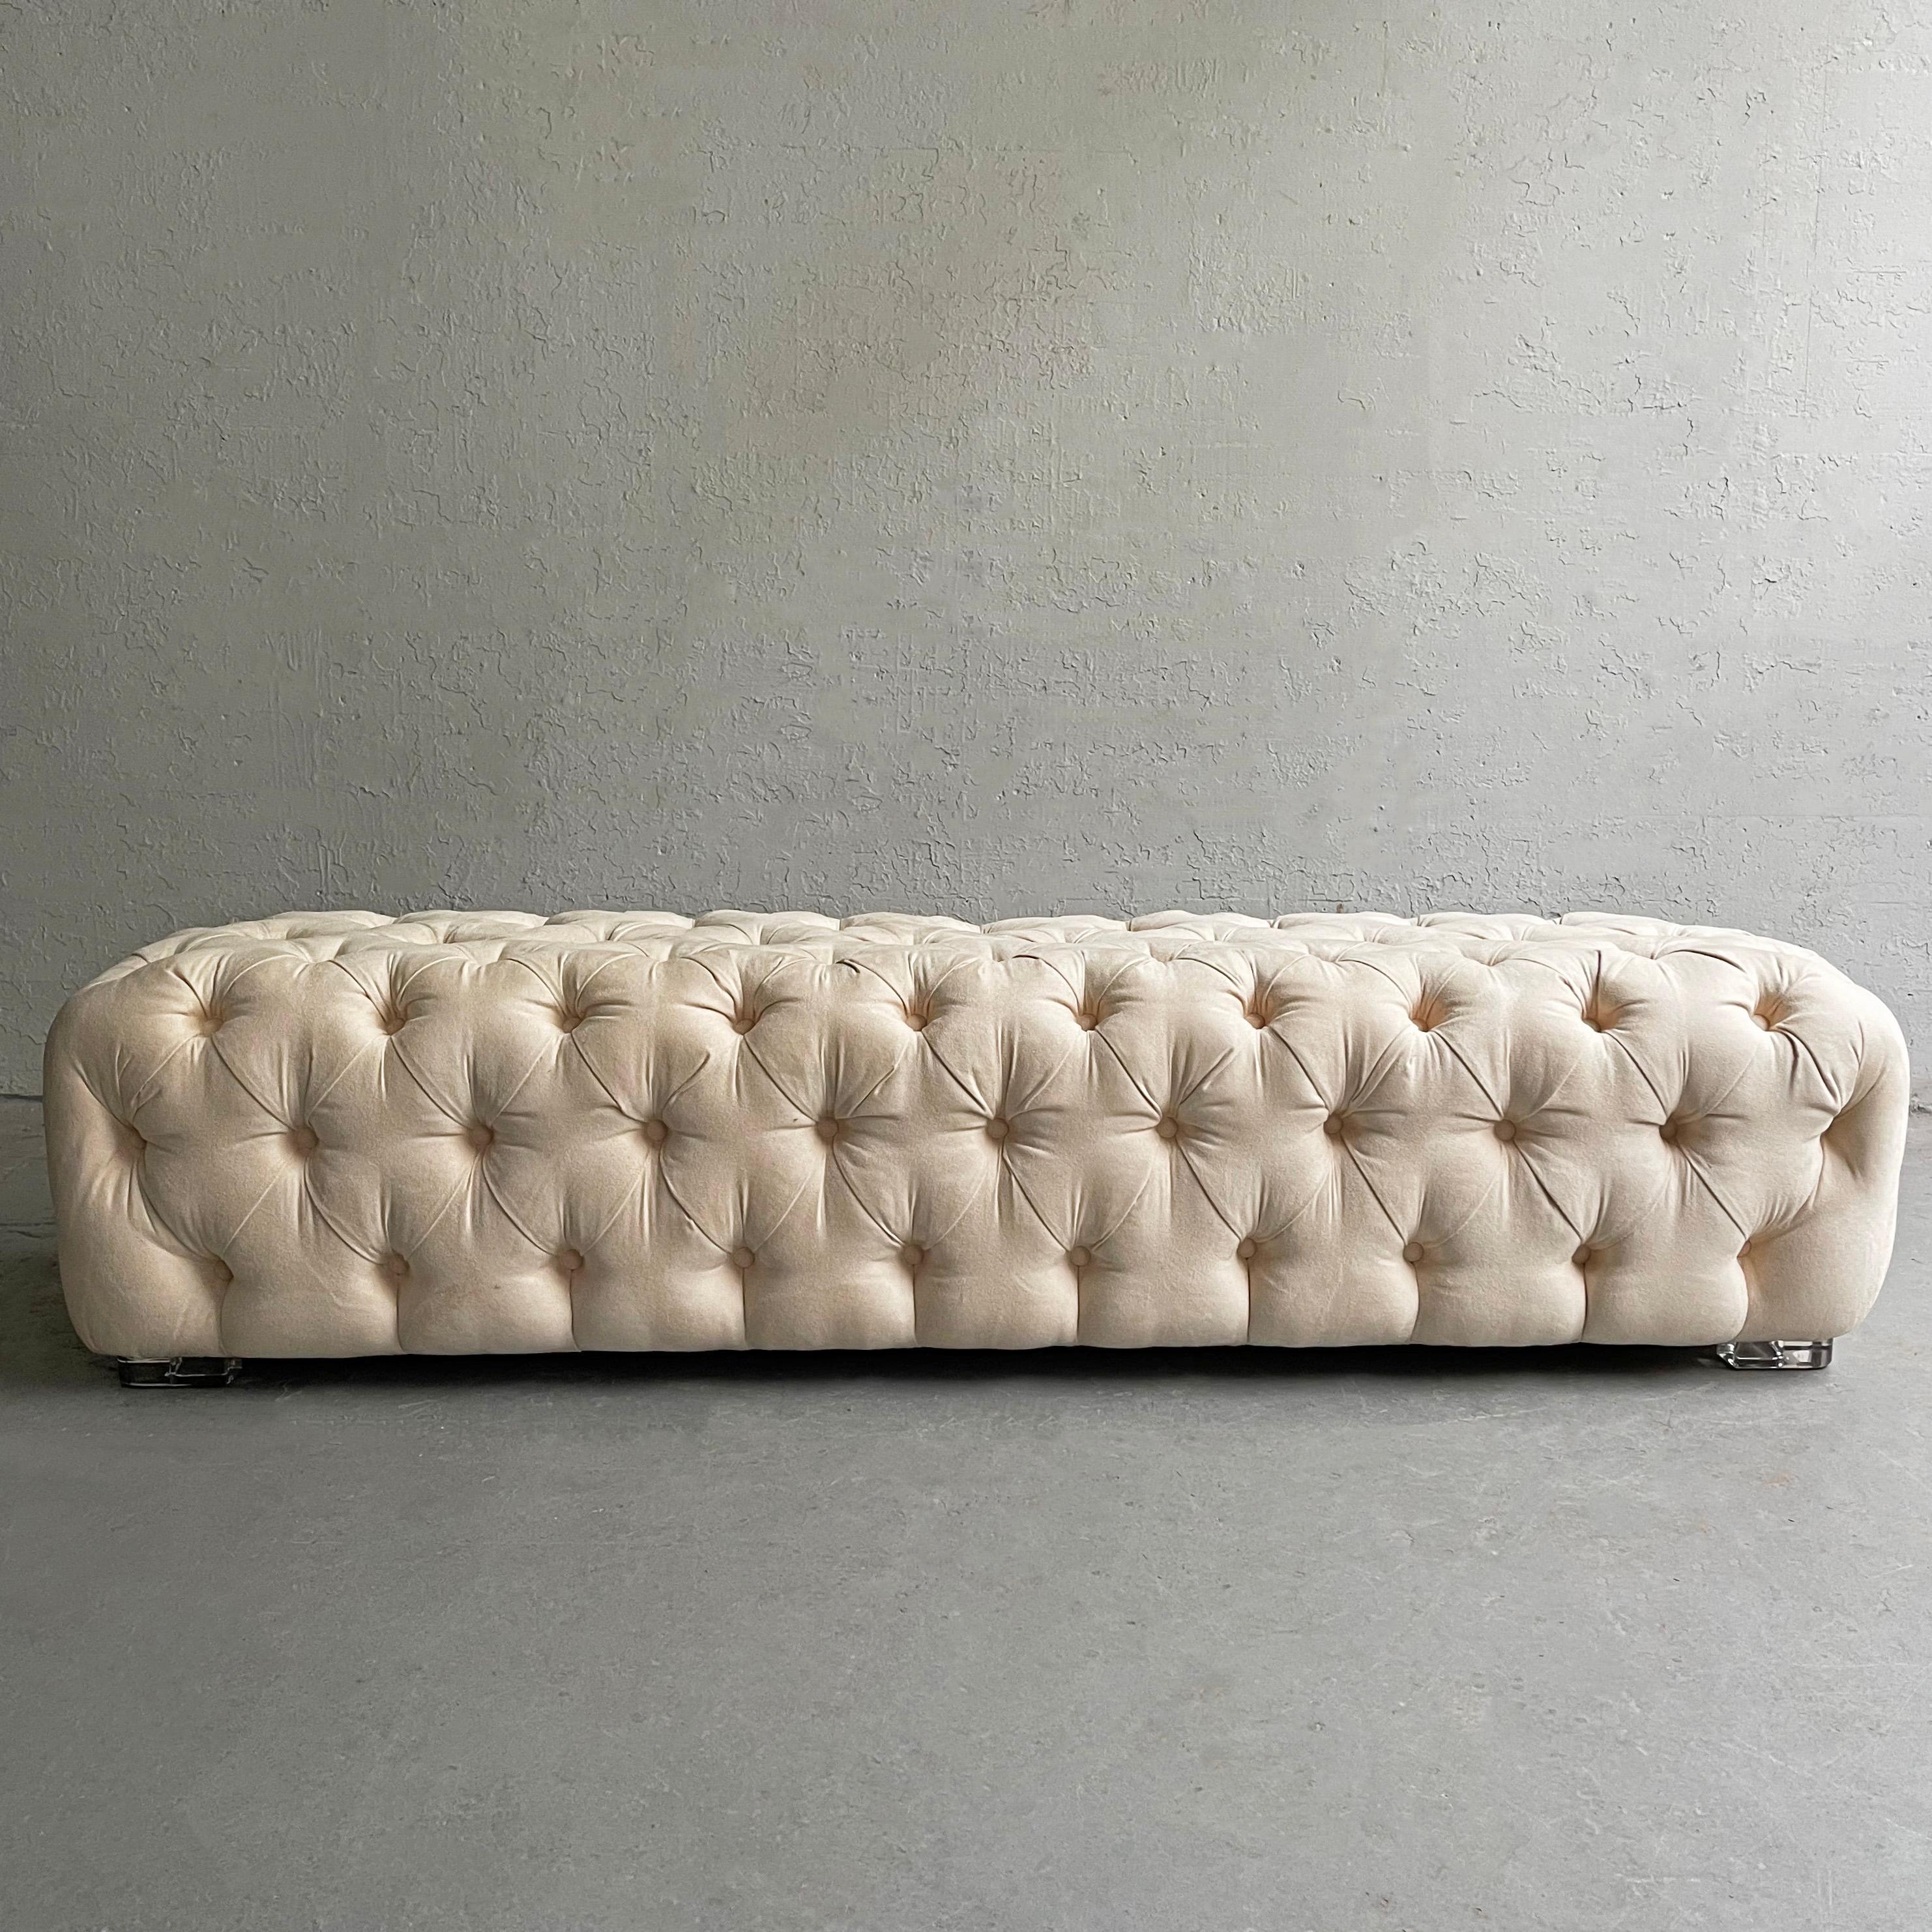 Sumptuous, fully upholstered, cream, tufted ultrasuede, 6ft bench by Shlomi Haziza, H Studio with Lucite feet. A shorter bench is also available at 51 inches wide, shown in the last three images.